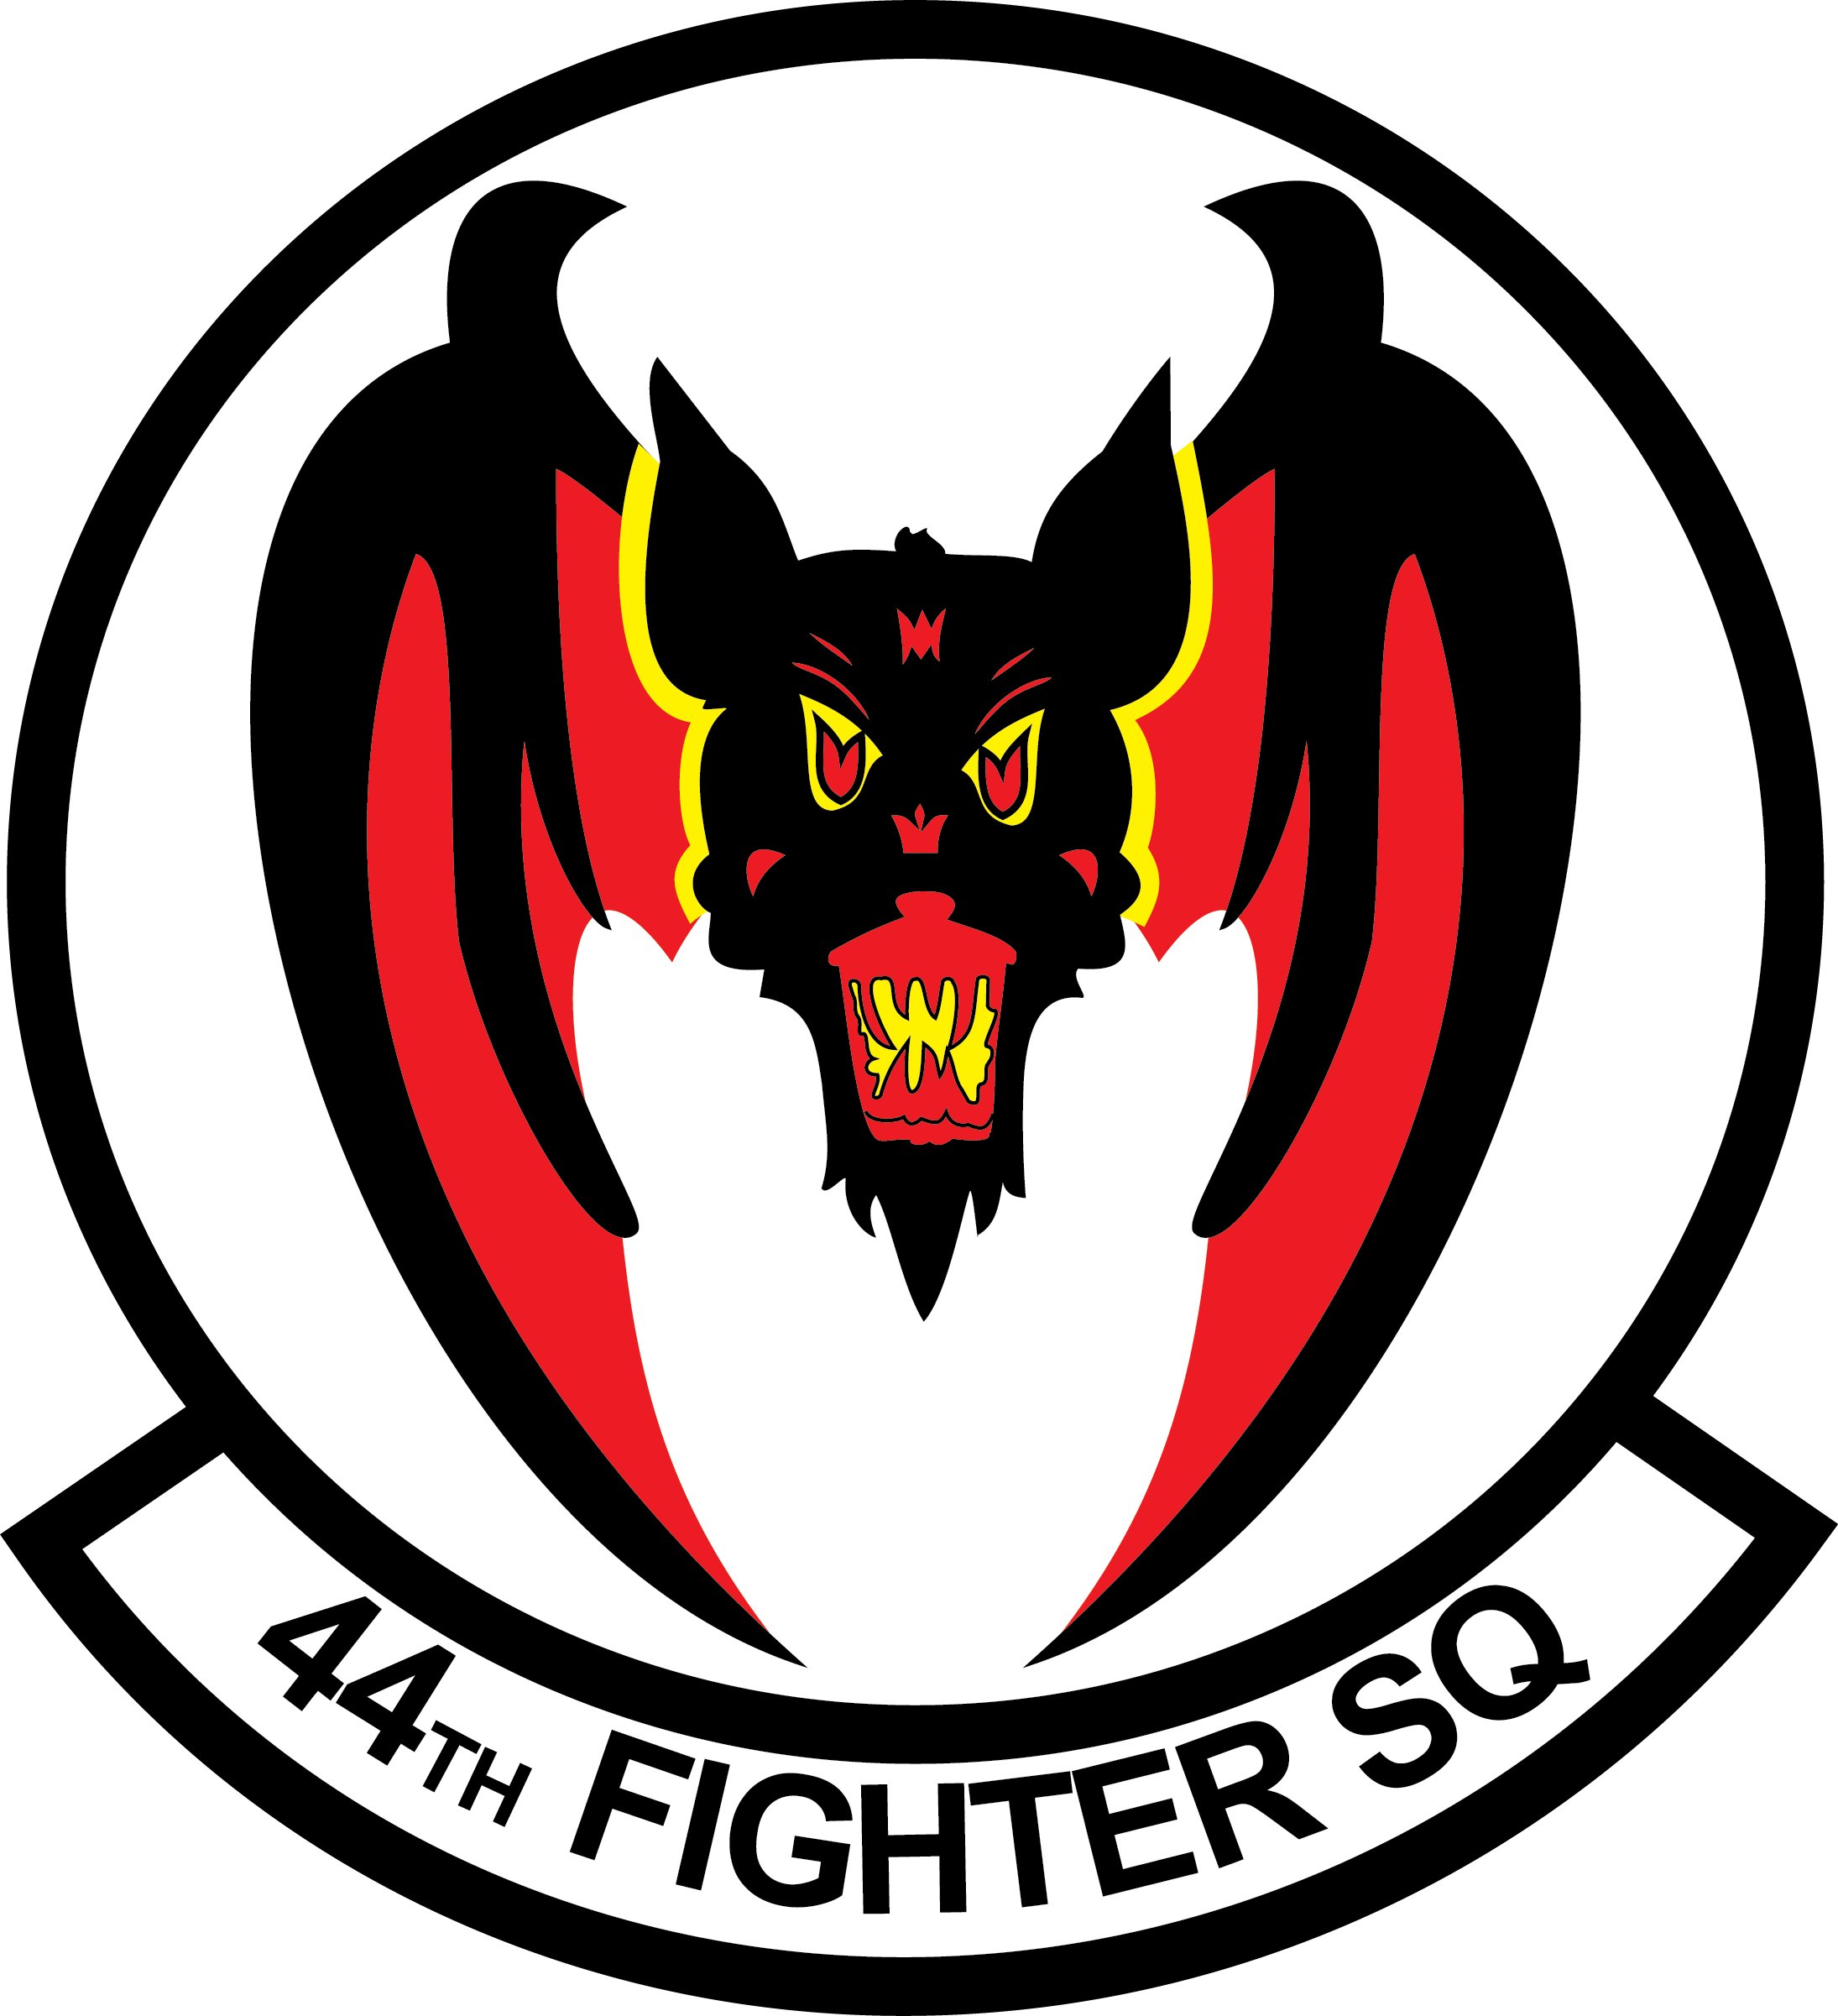 Photo Details / Download - 44th Fighter Squadron Patch (2190x2402)